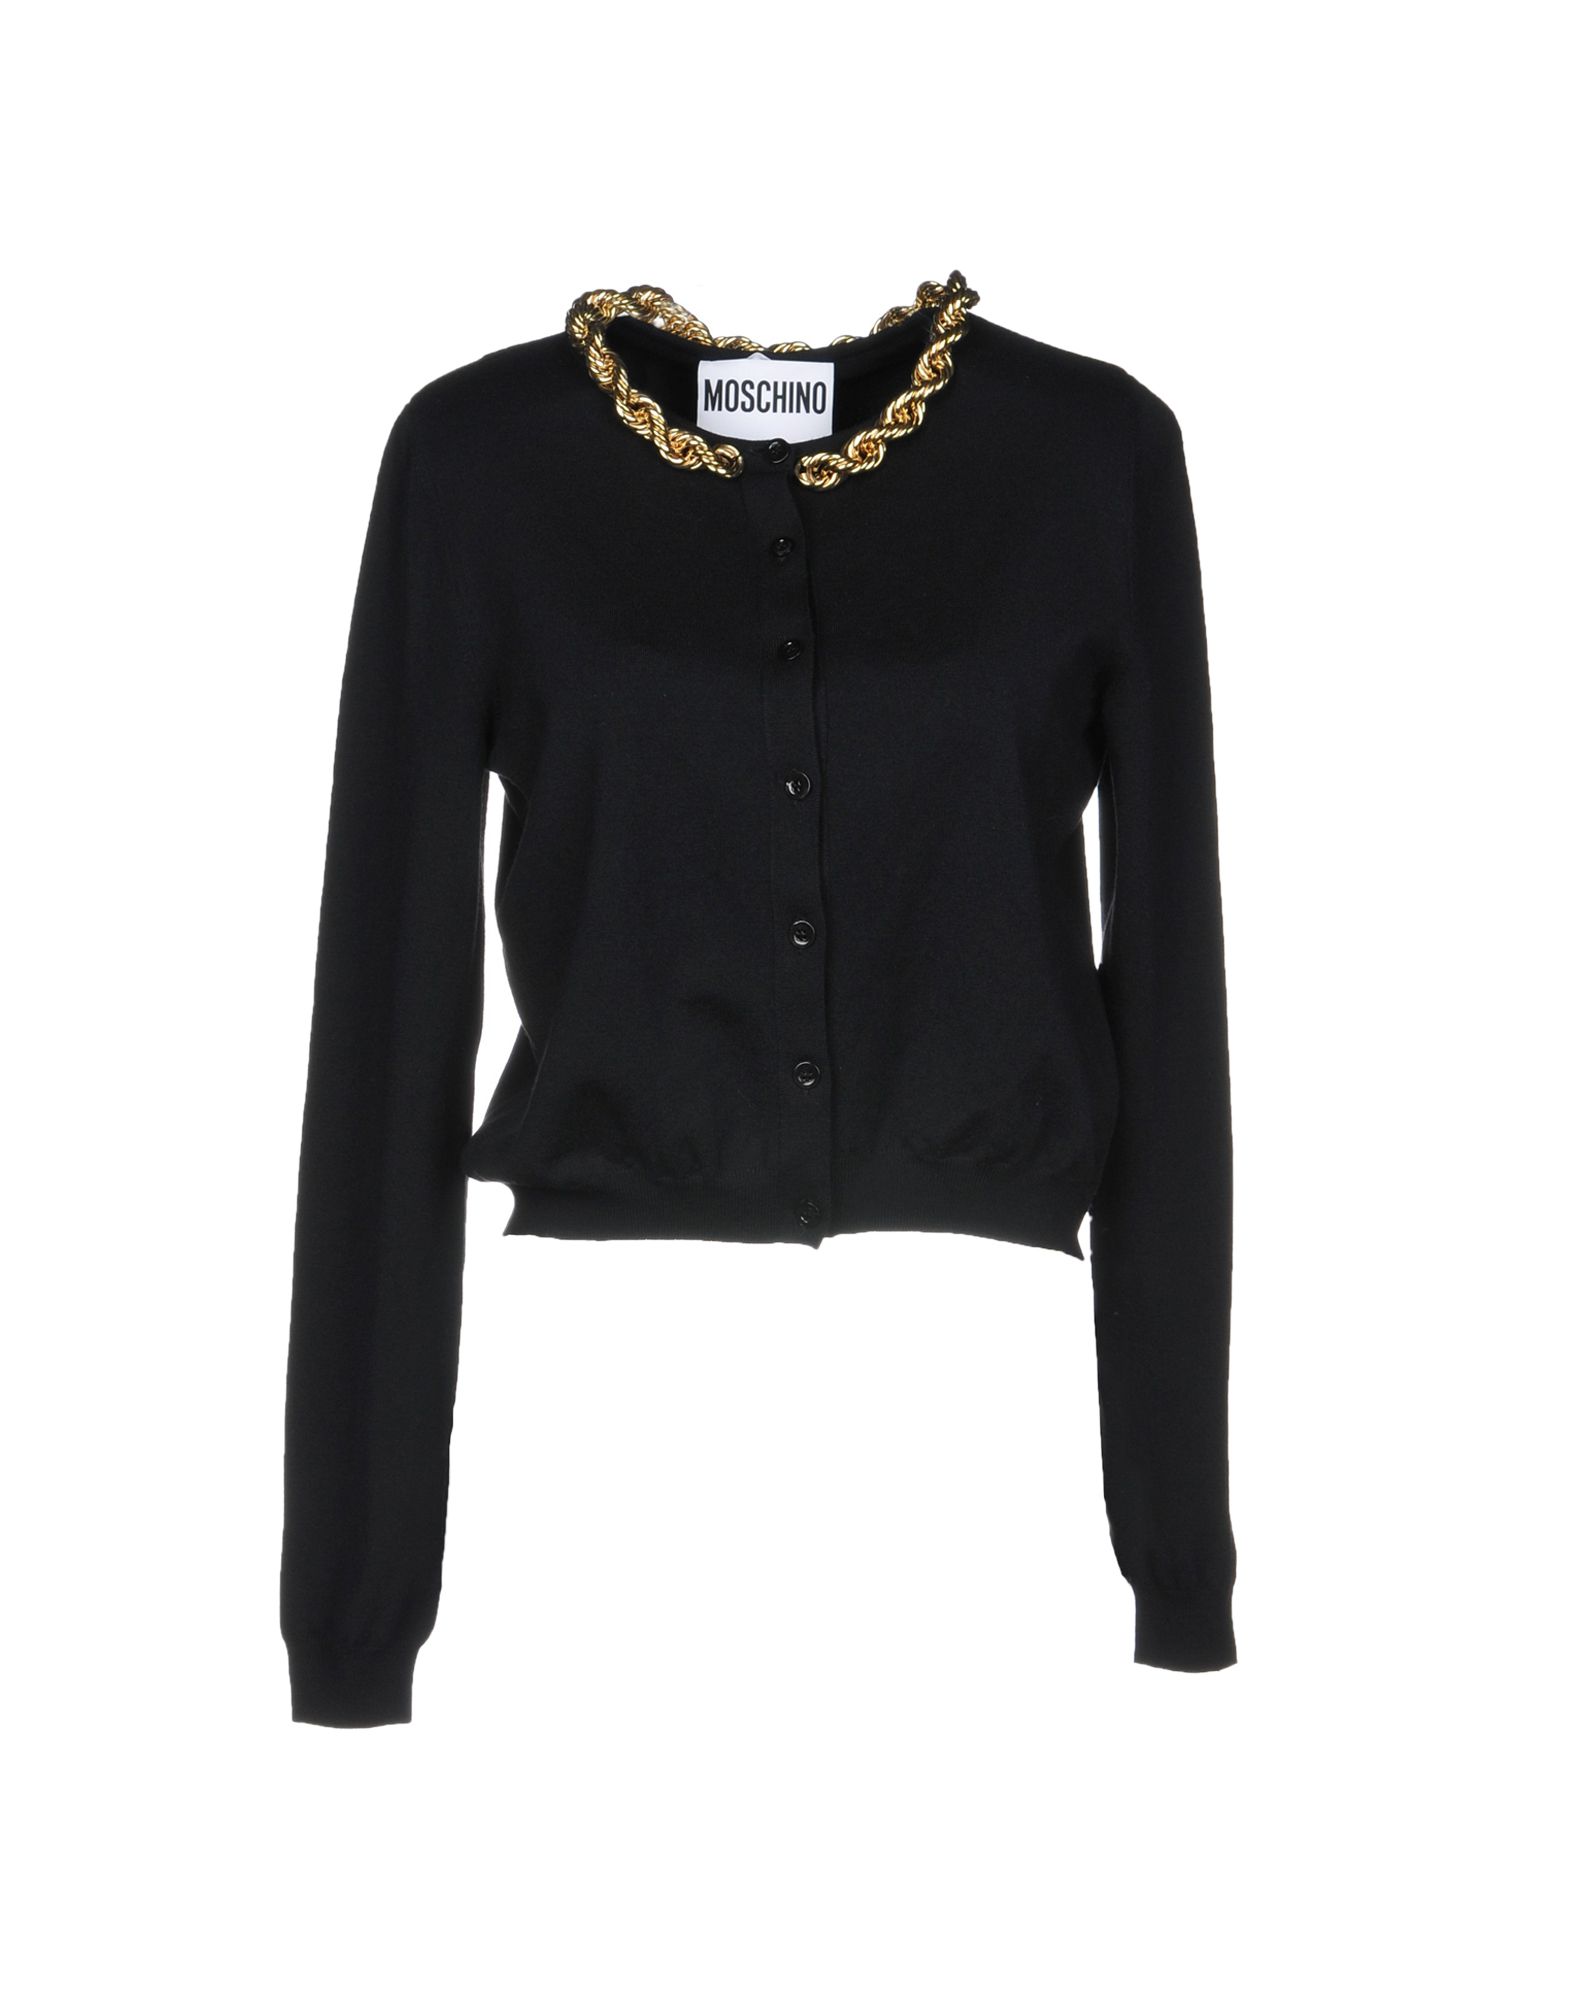 MOSCHINO CARDIGANS,39851057CL 5